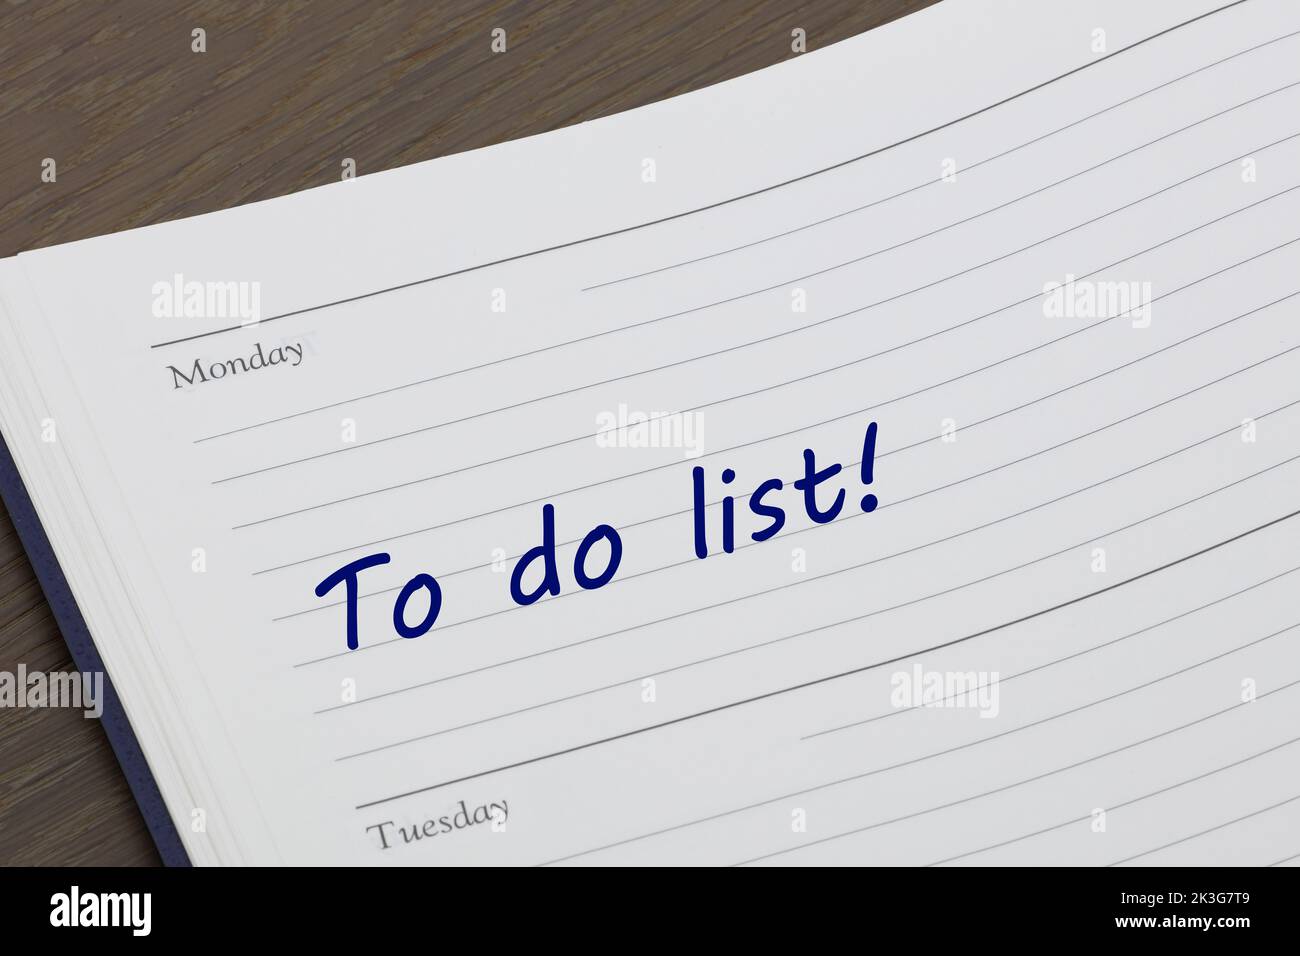 To do list diary reminder open on desk Stock Photo